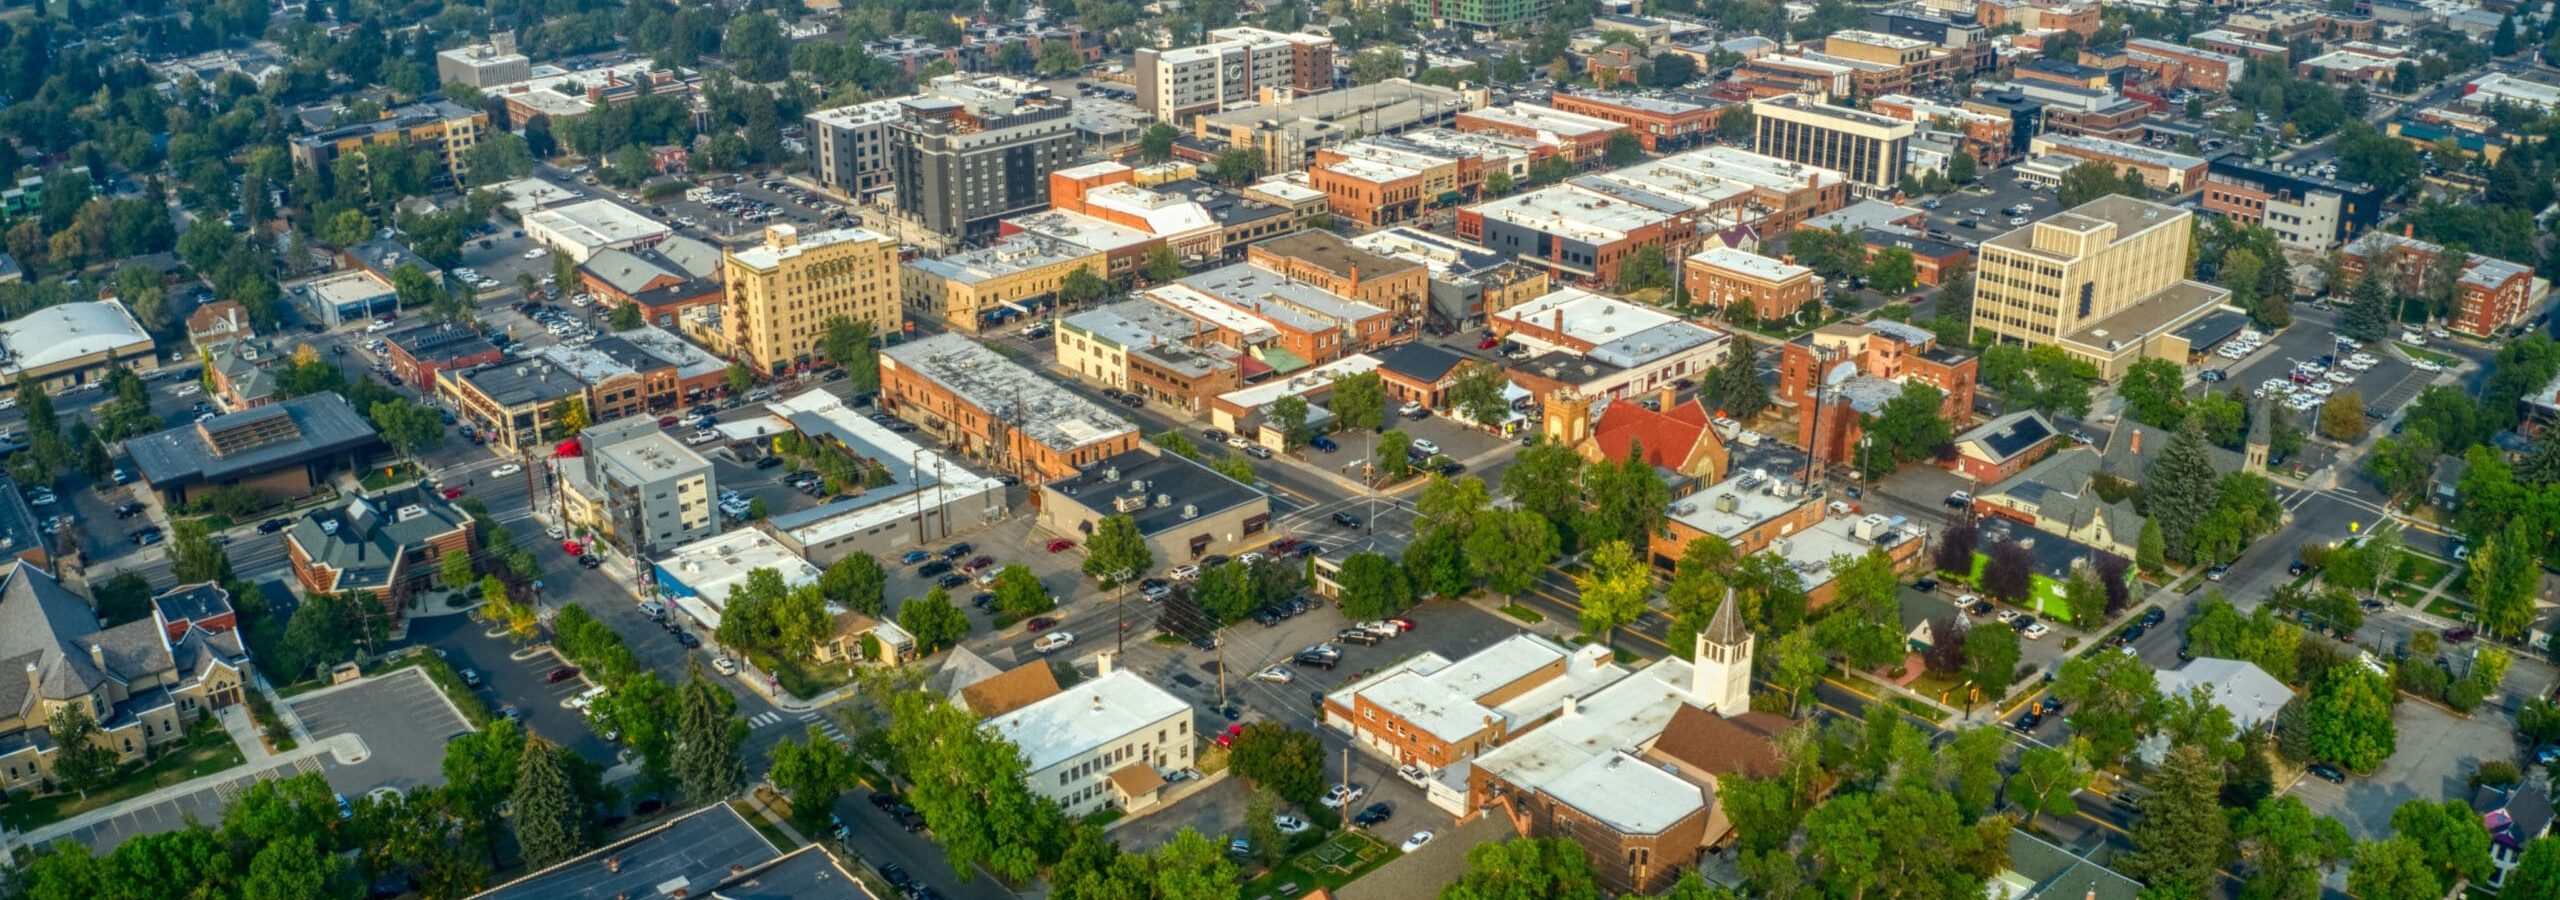 Aerial,View,Of,Downtown,Bozeman,,Montana,In,Summer